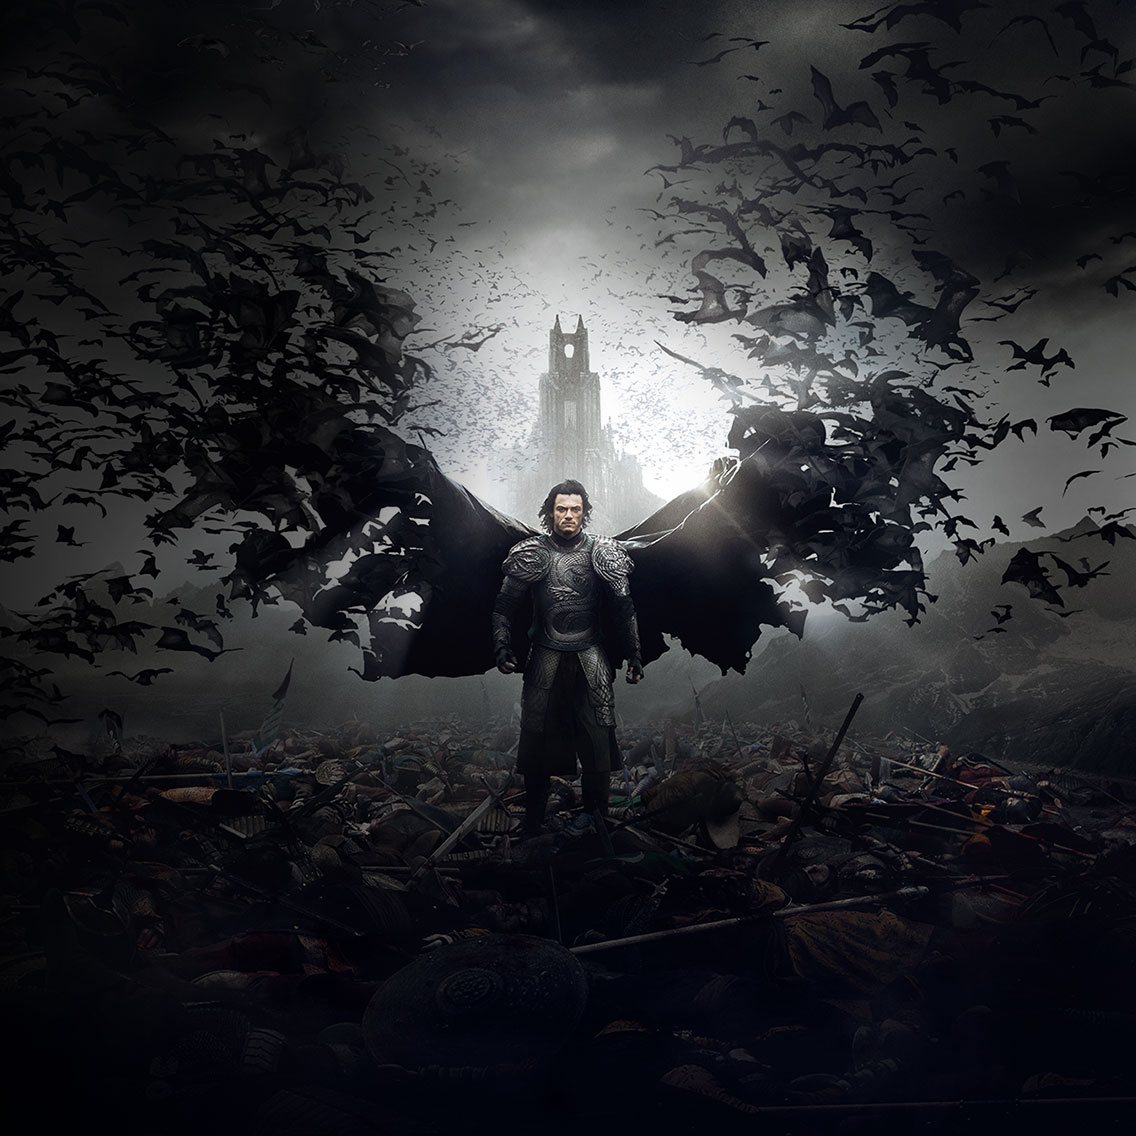 Dracula Untold wallpapers, Movie, HQ Dracula Untold pictures | 4K ...